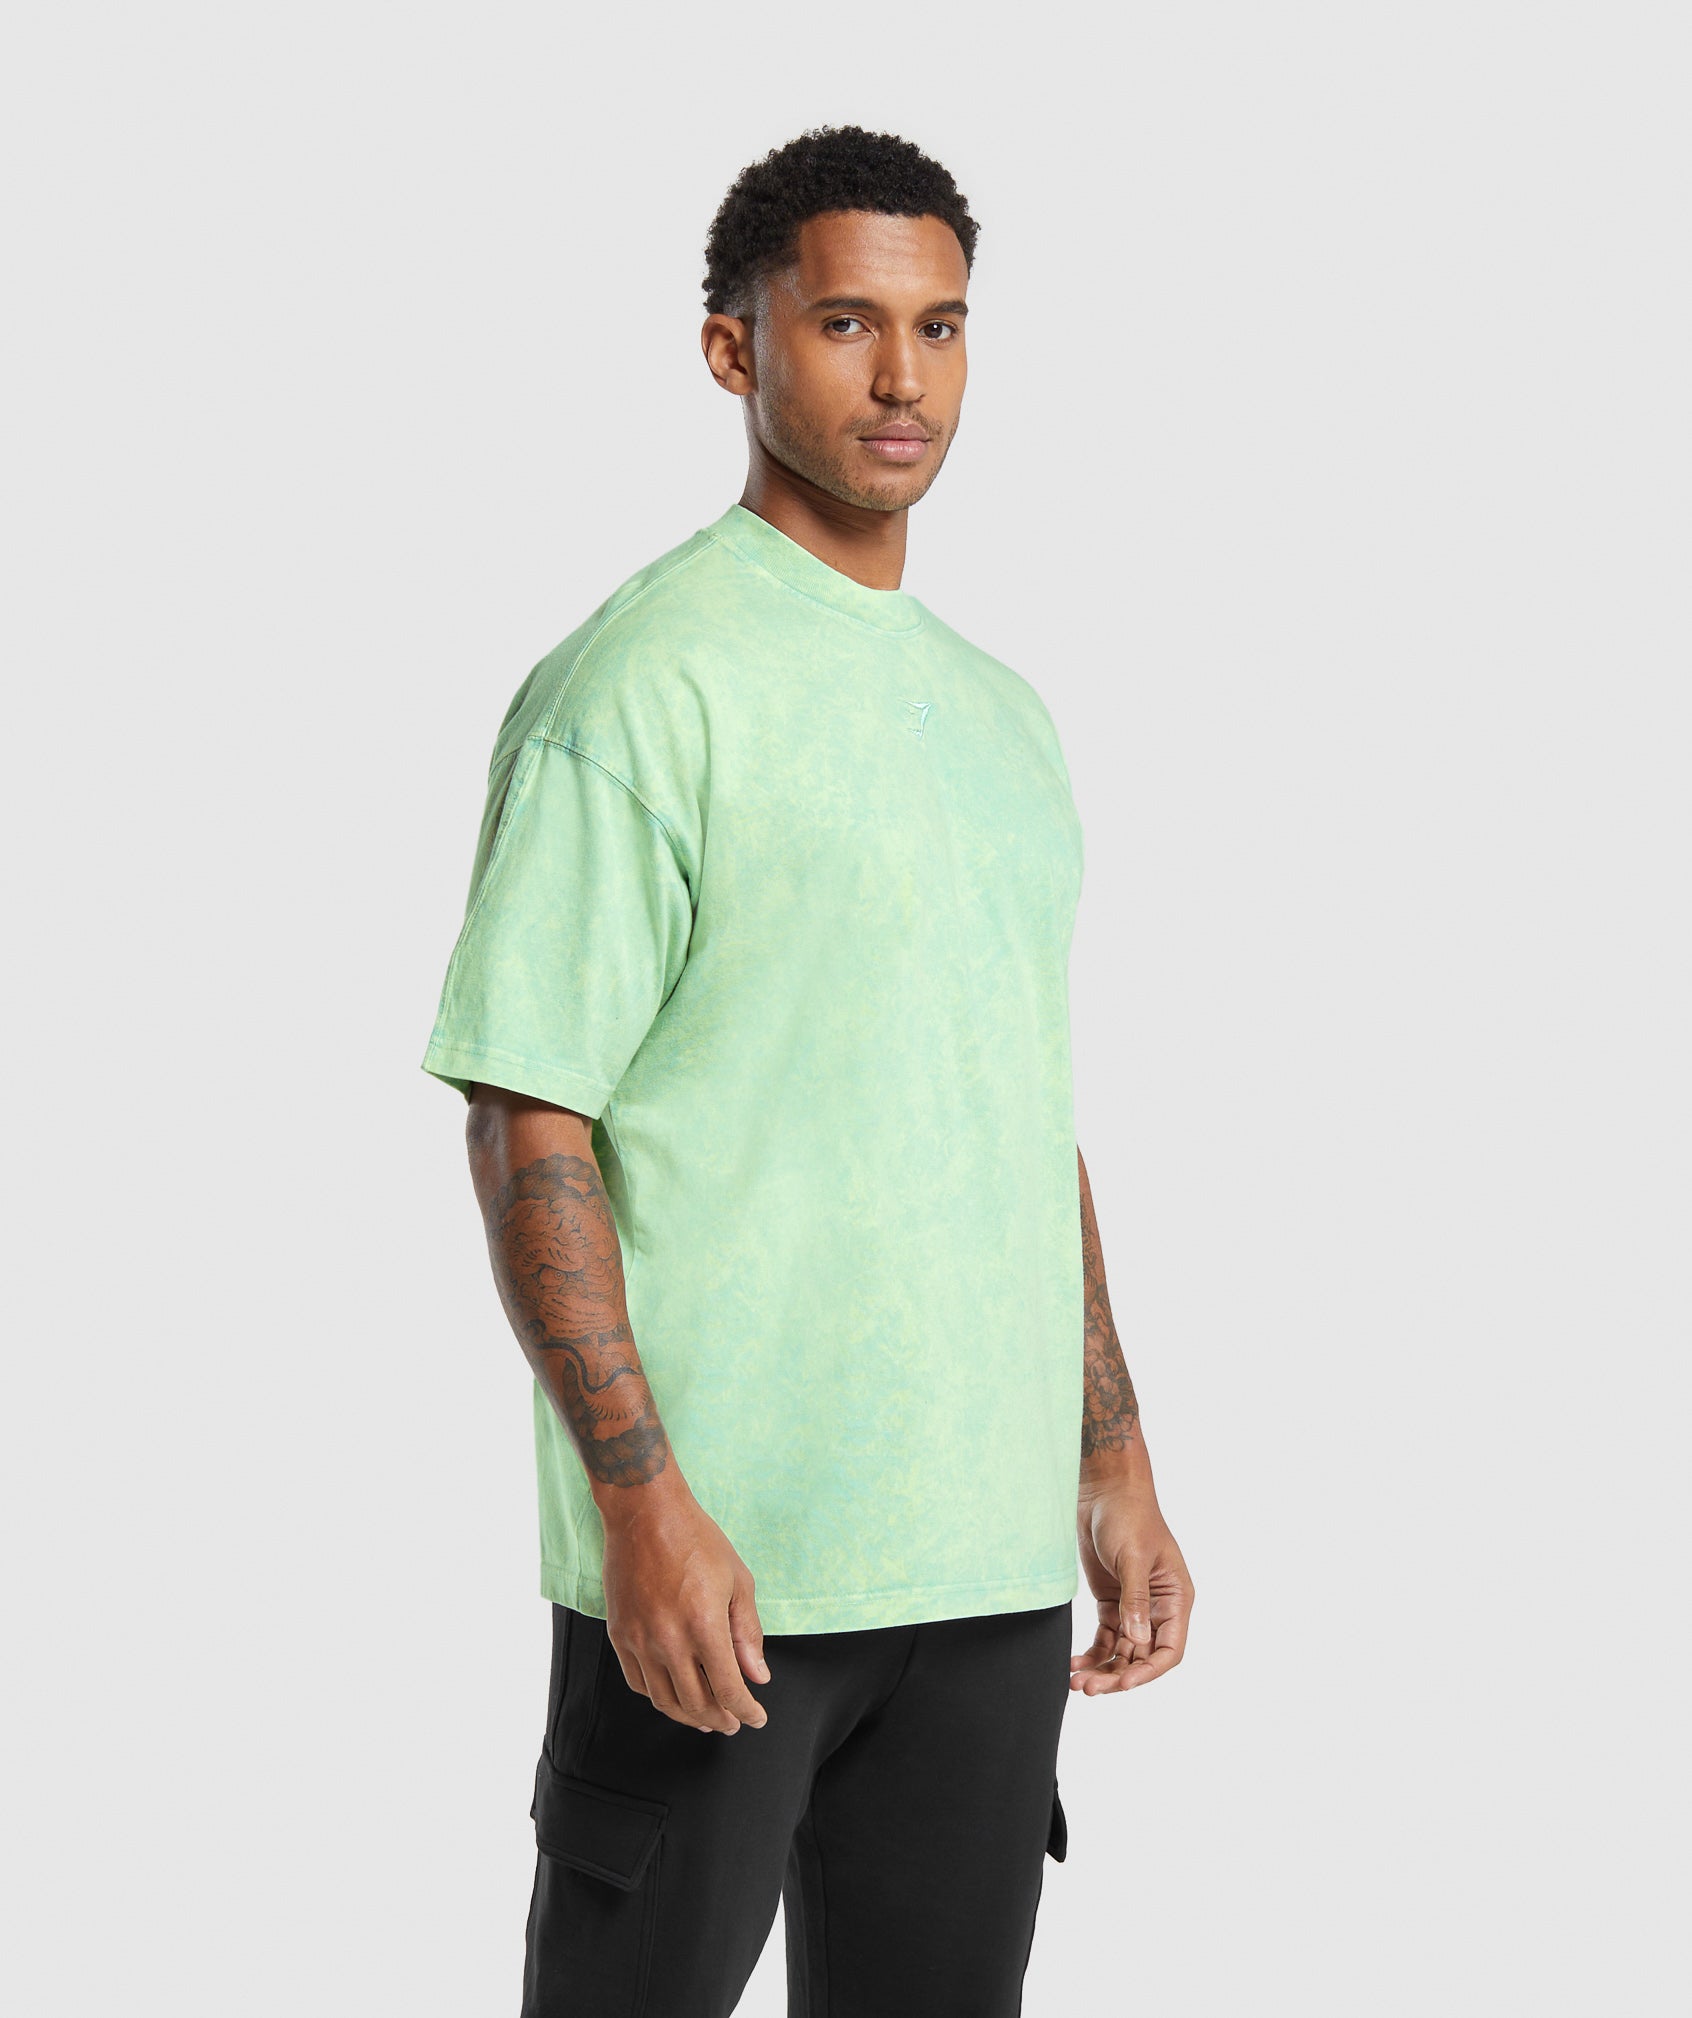 Rest Day Washed T-Shirt in Lido Green - view 3